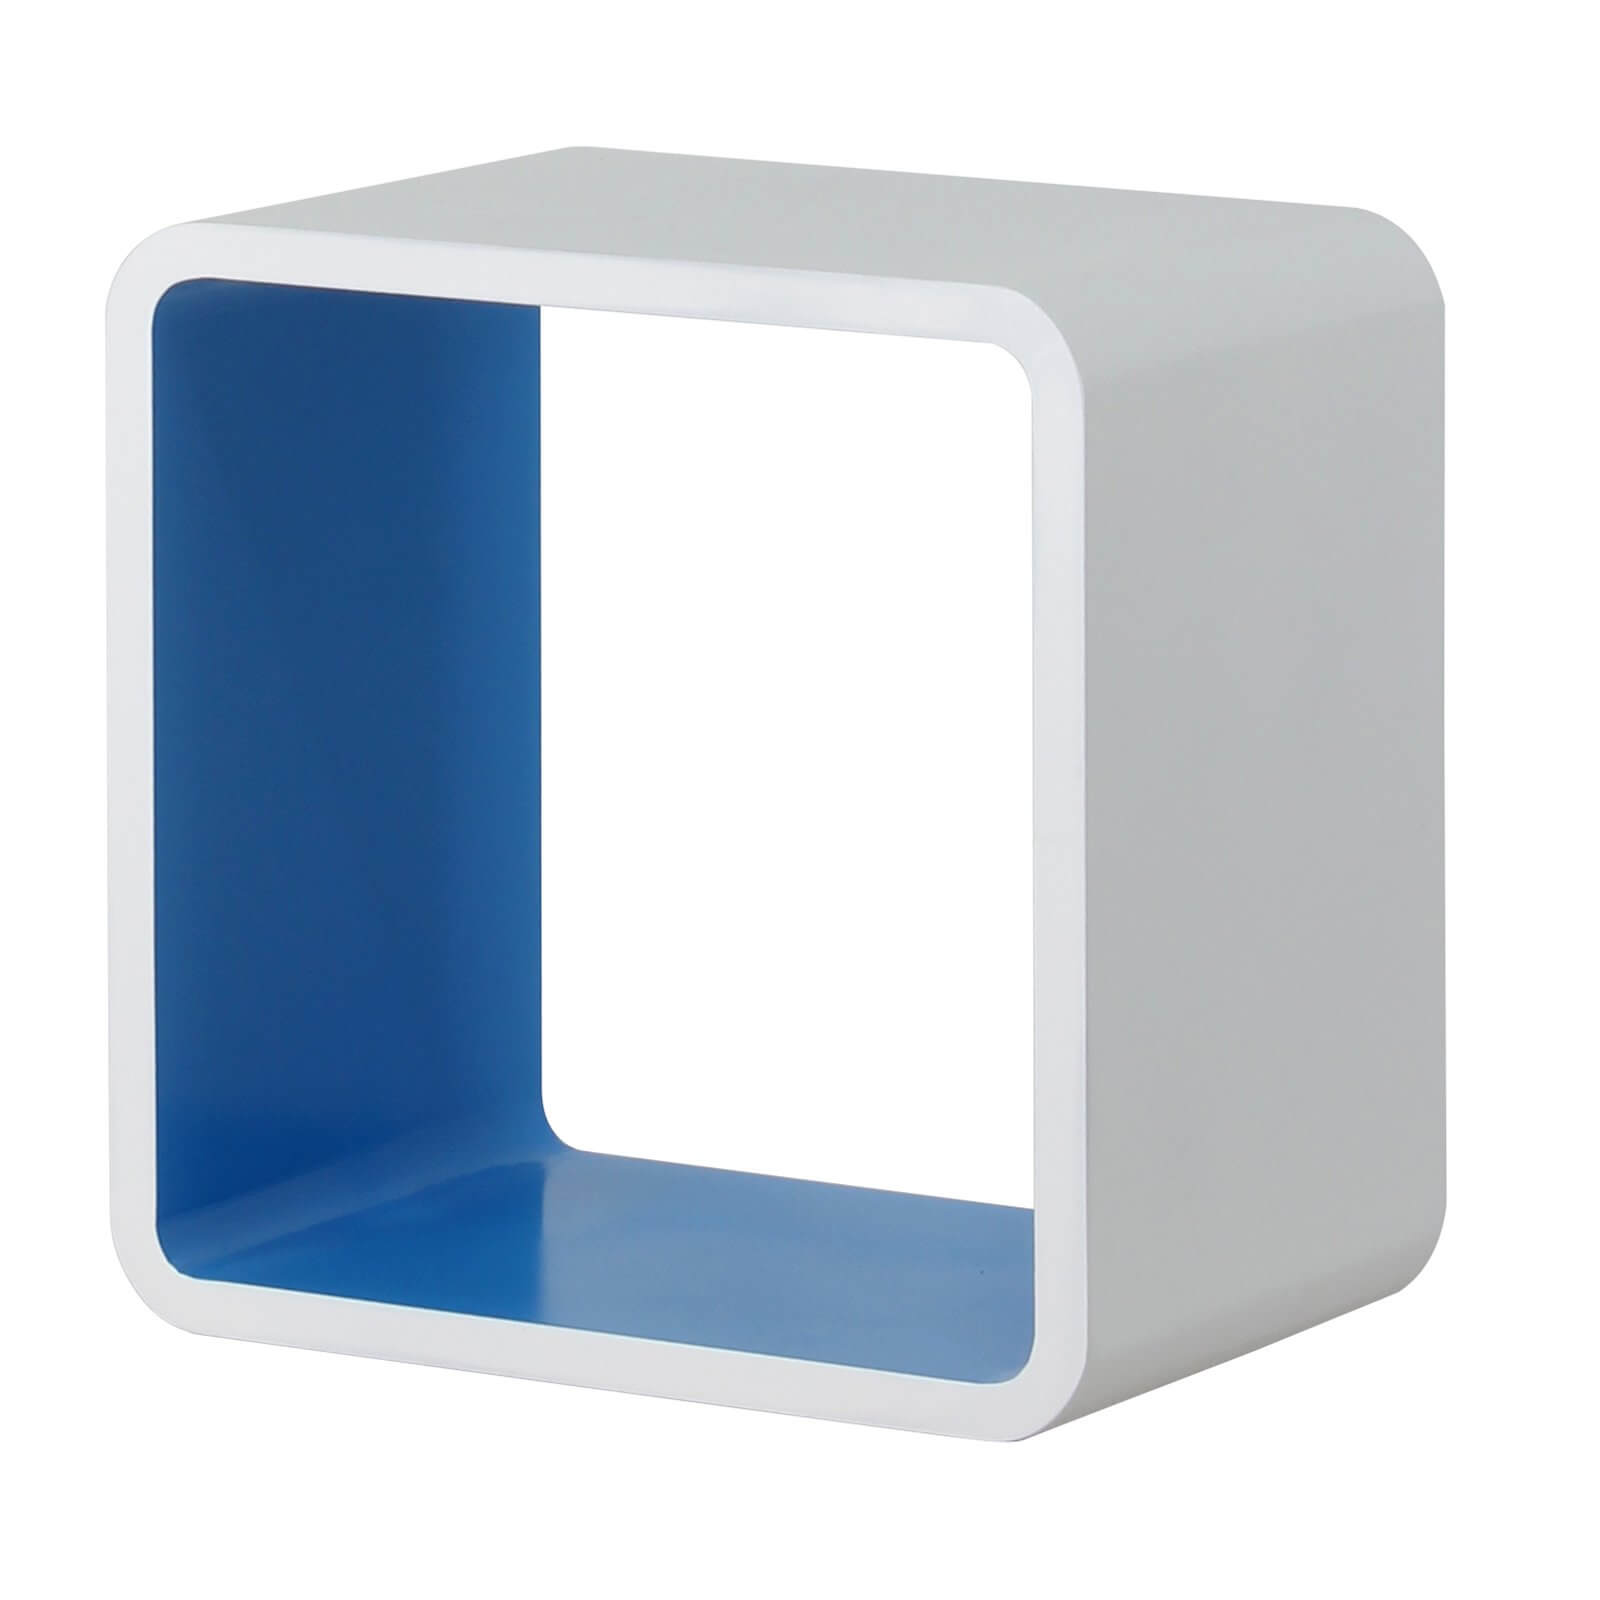 Cube Wall Shelf - White and Blue